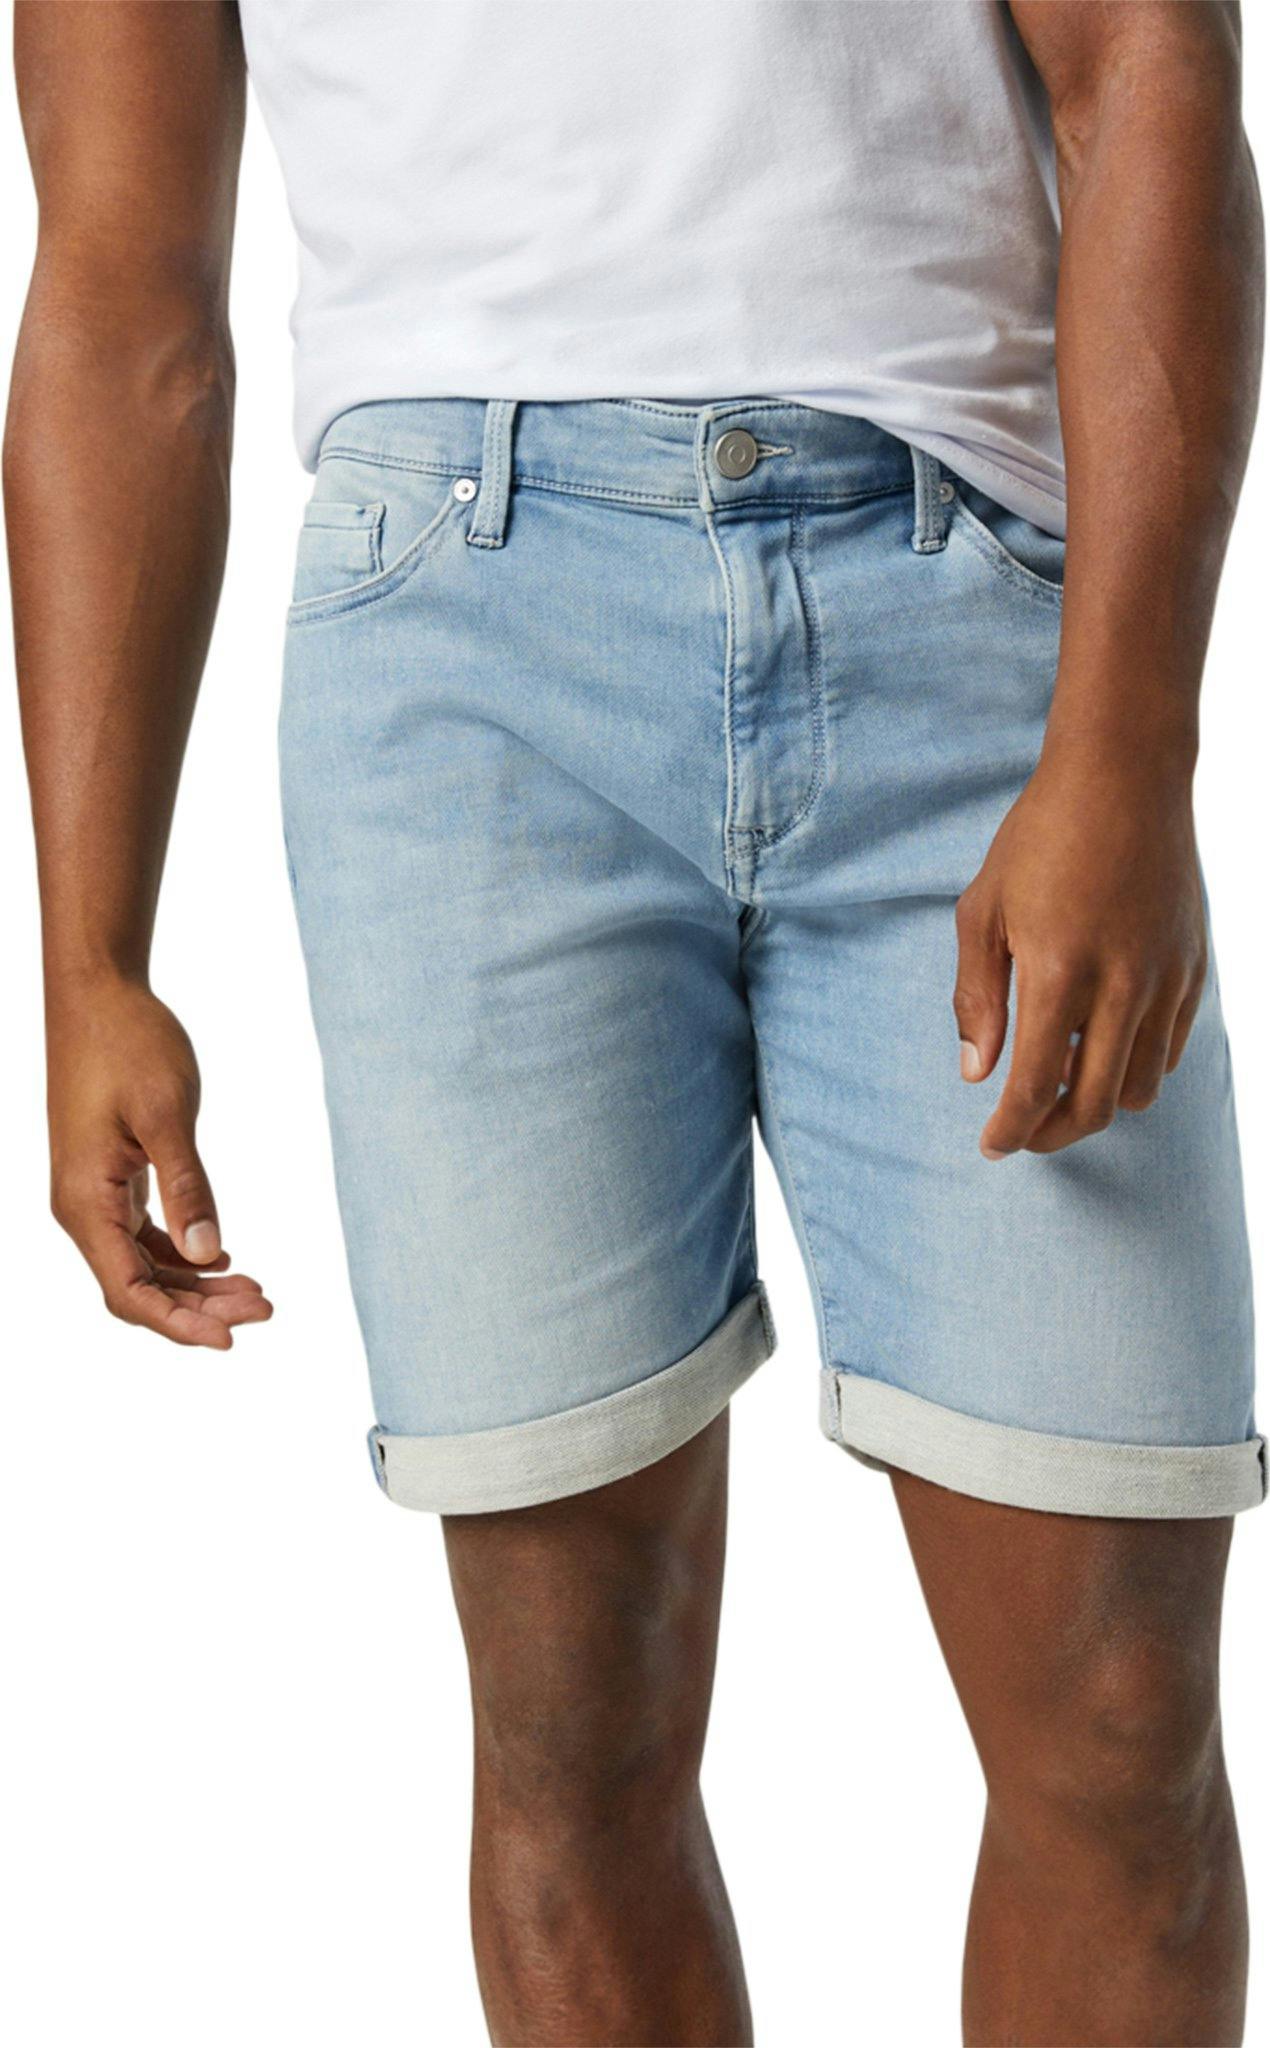 Product image for Brian Athletic Denim Shorts - Men's